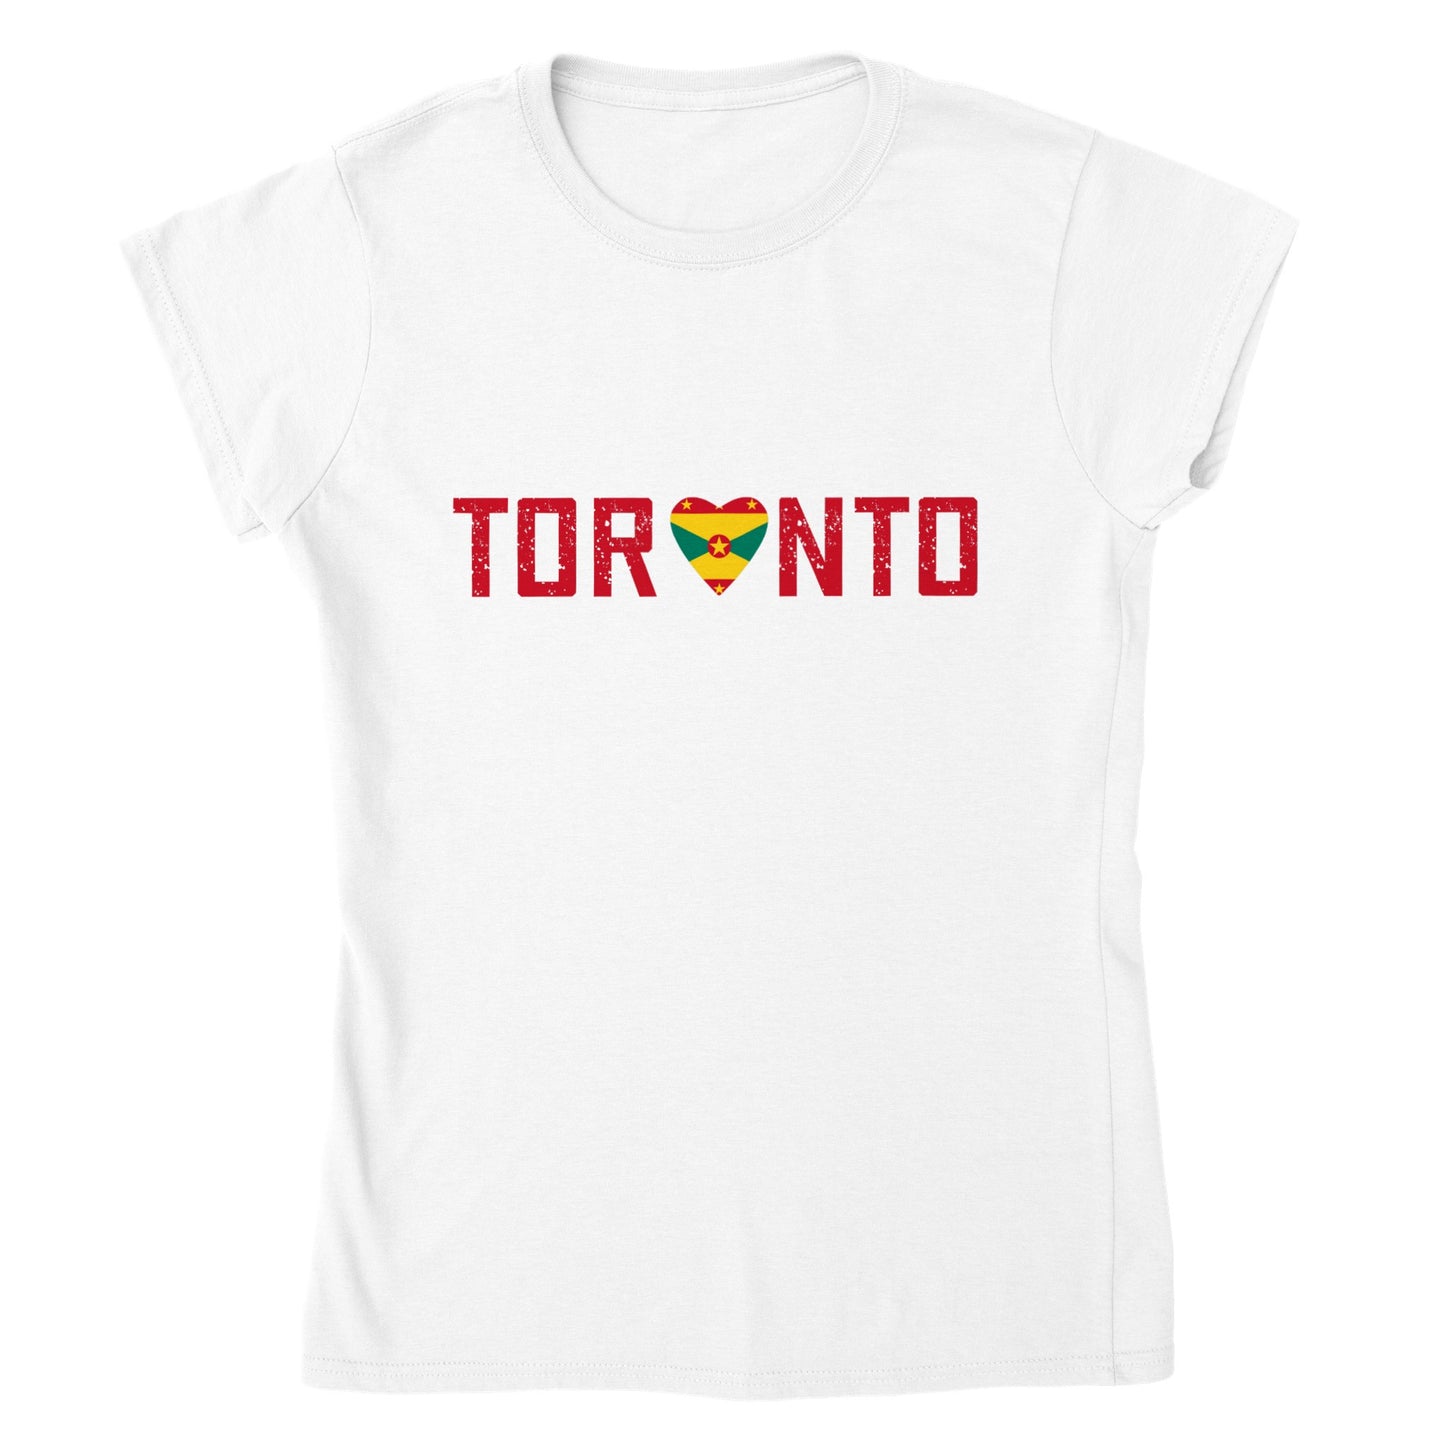 Toronto at Heart - Grenada - Classic Fitted Crewneck T-shirt